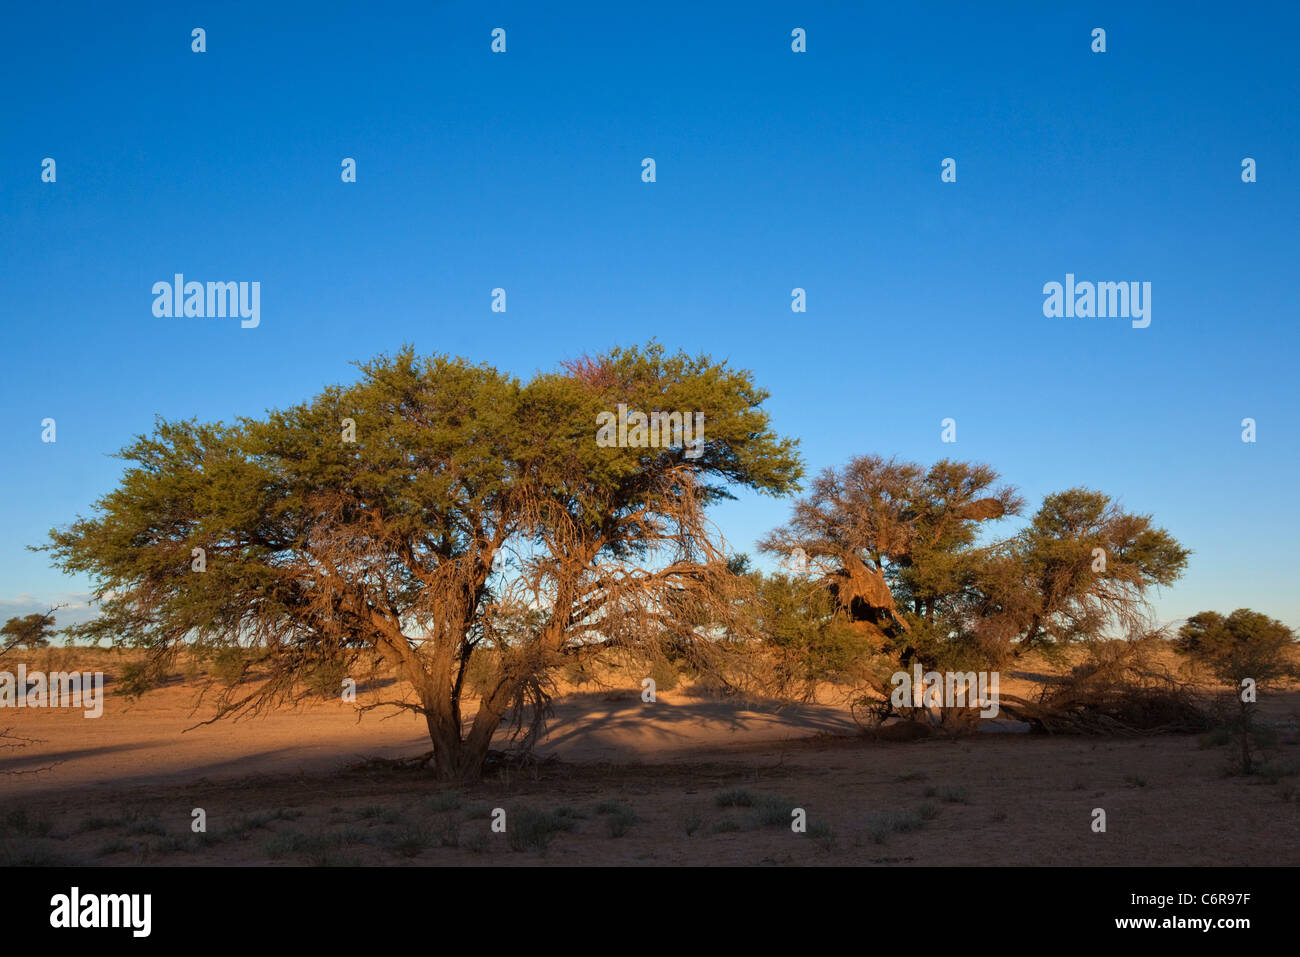 Scenic view of Camelthorn trees with sociable weavers nests (Acacia erioloba) in the Auob riverbed Stock Photo